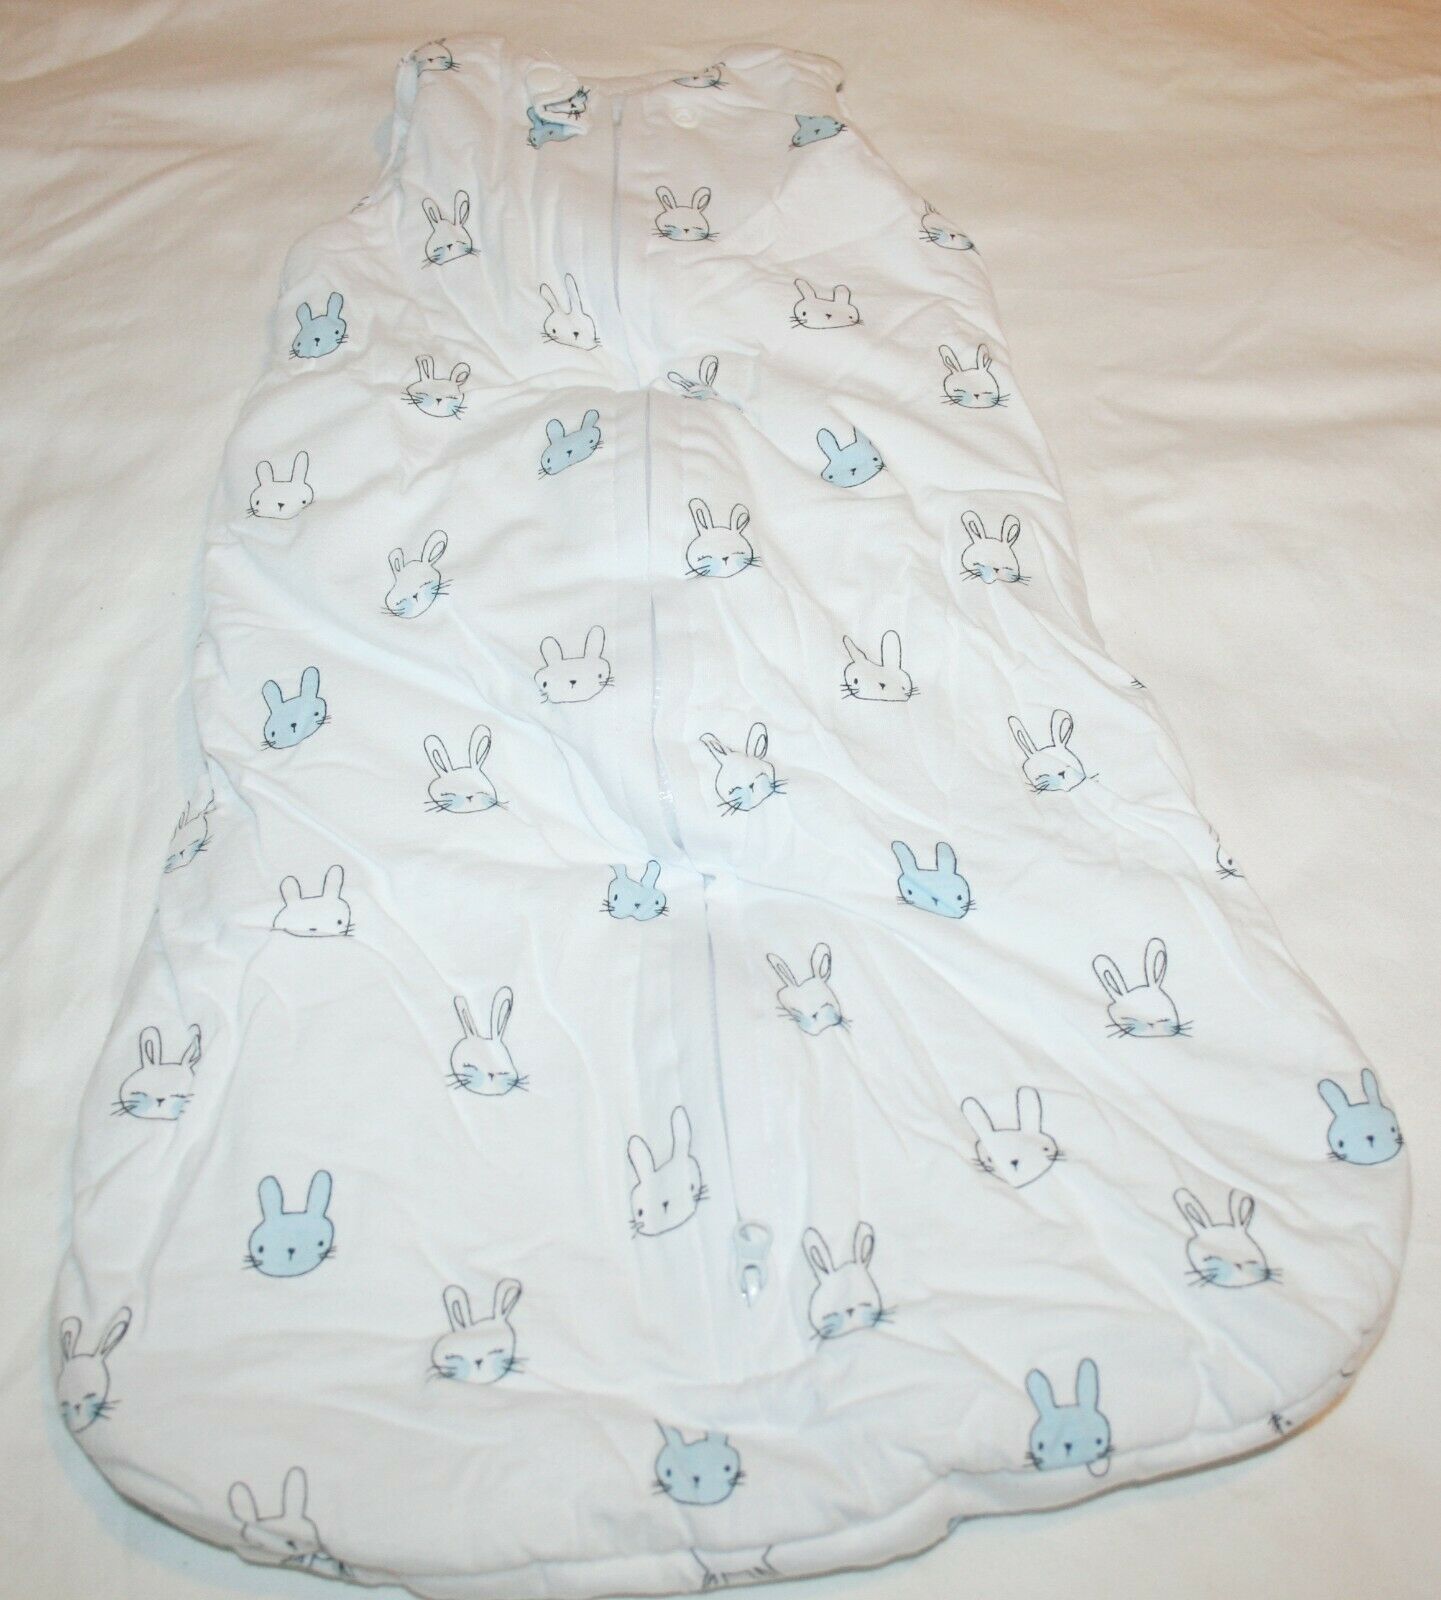 Ely's & Co Baby Wearable Blanket Sleeping Bag Sack Winter Weight - Small 0-3m